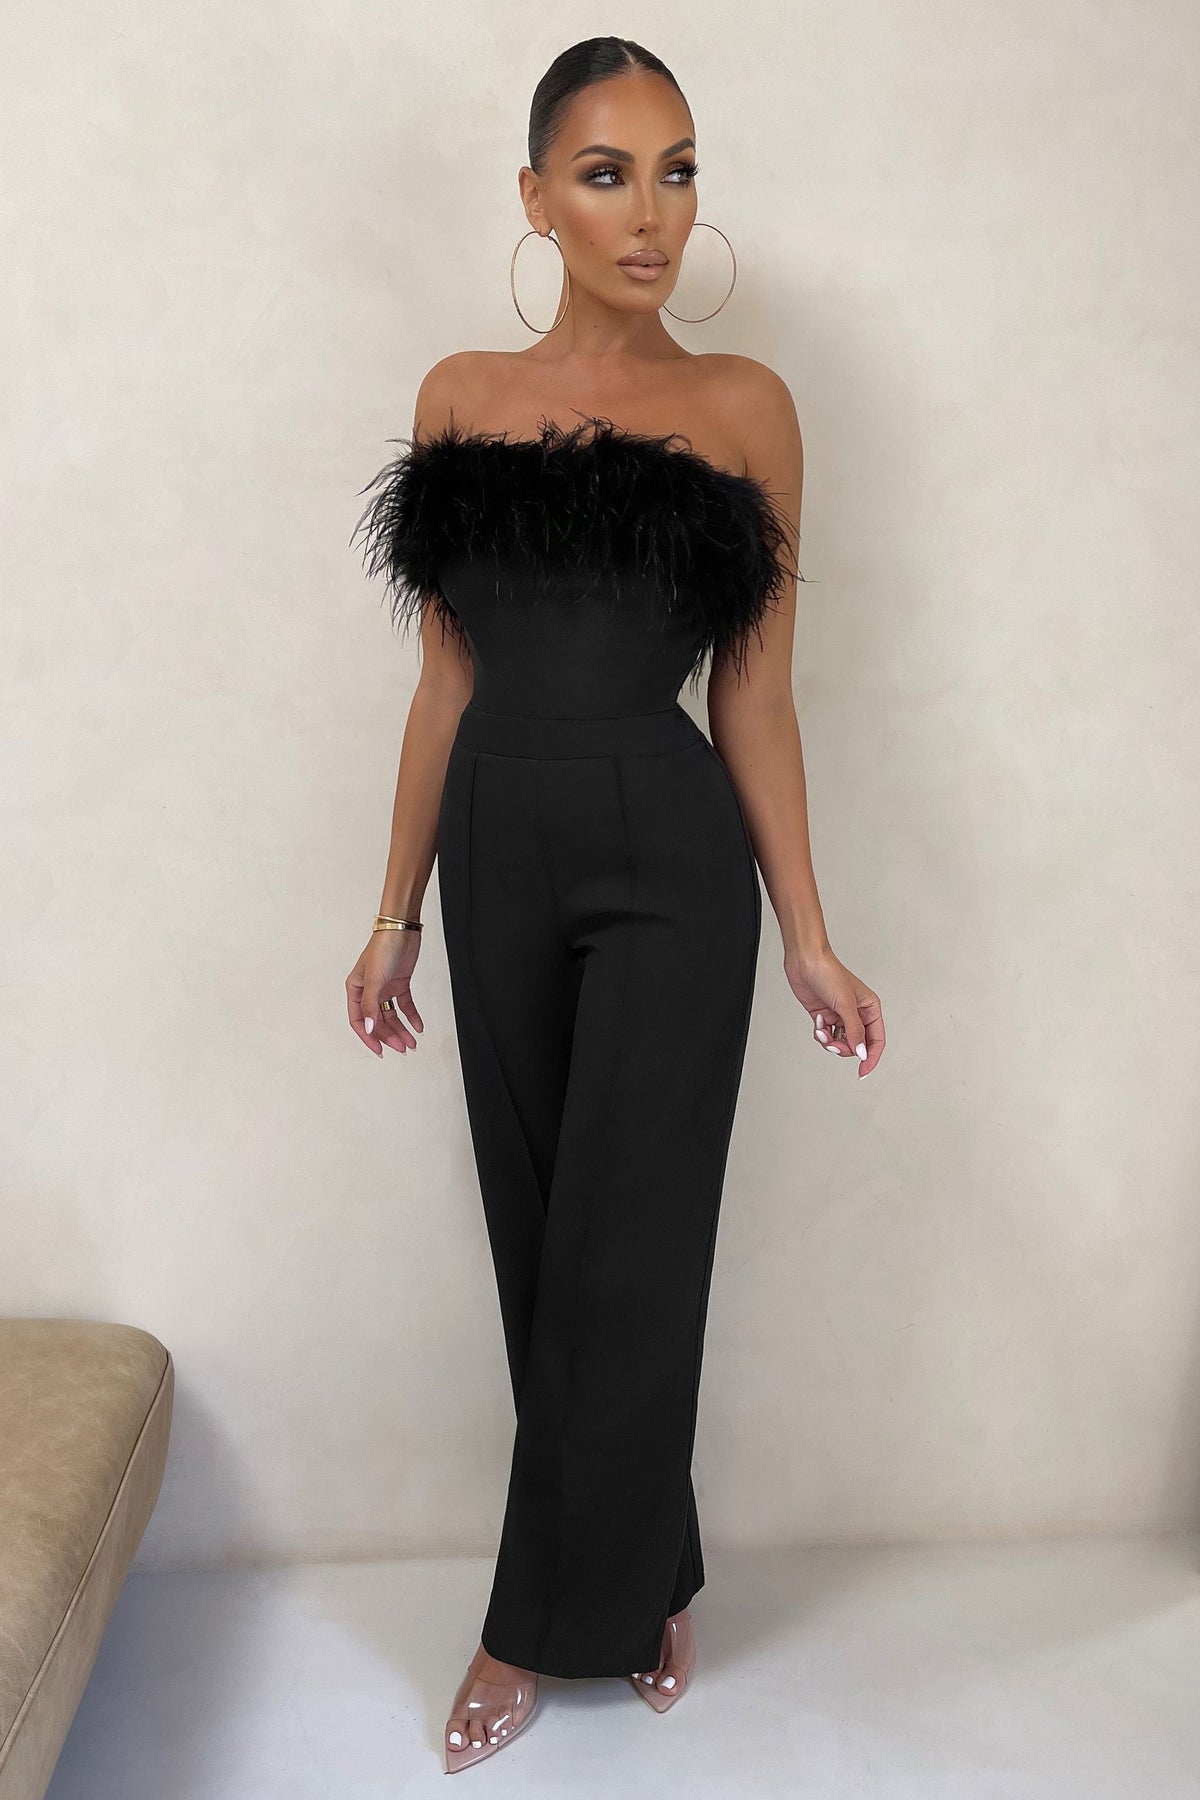 Cool And Classy Black Jumpsuit